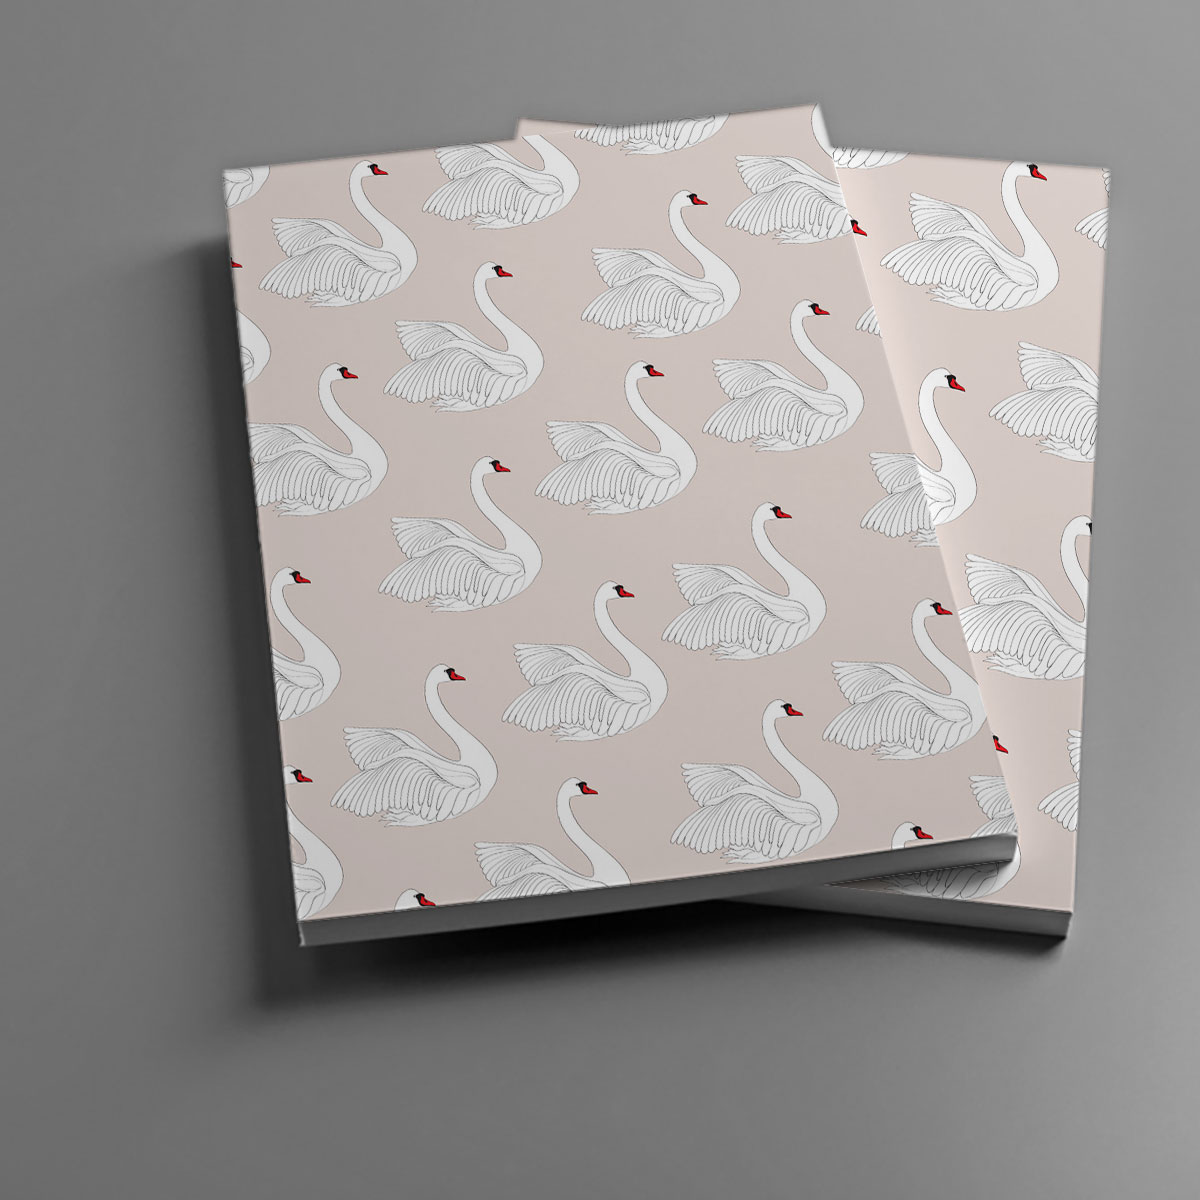 Iconic White Swan Notebook